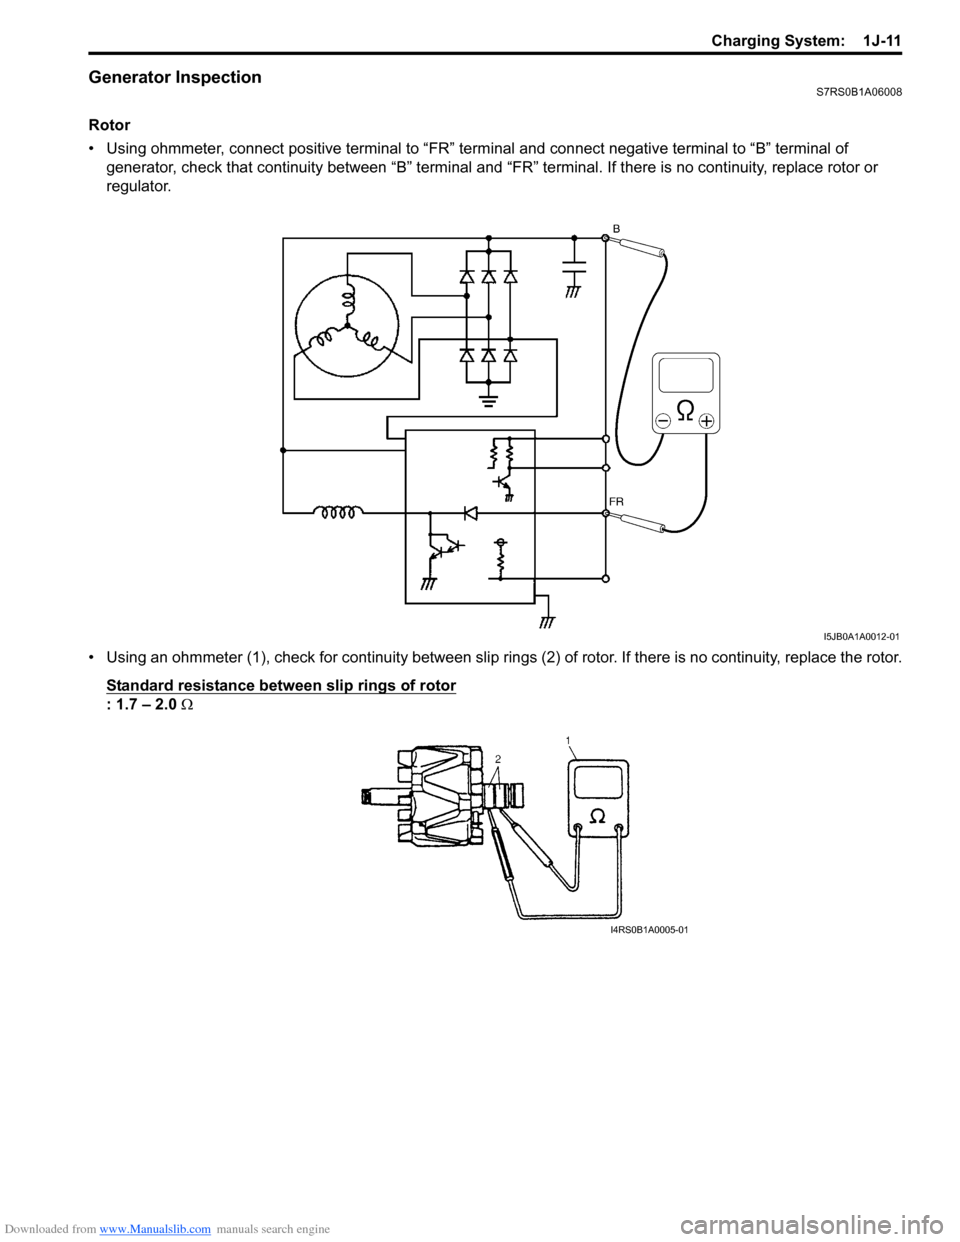 SUZUKI SWIFT 2008 2.G Service Workshop Manual Downloaded from www.Manualslib.com manuals search engine Charging System:  1J-11
Generator InspectionS7RS0B1A06008
Rotor
• Using ohmmeter, connect positive terminal to “FR” terminal and connect 